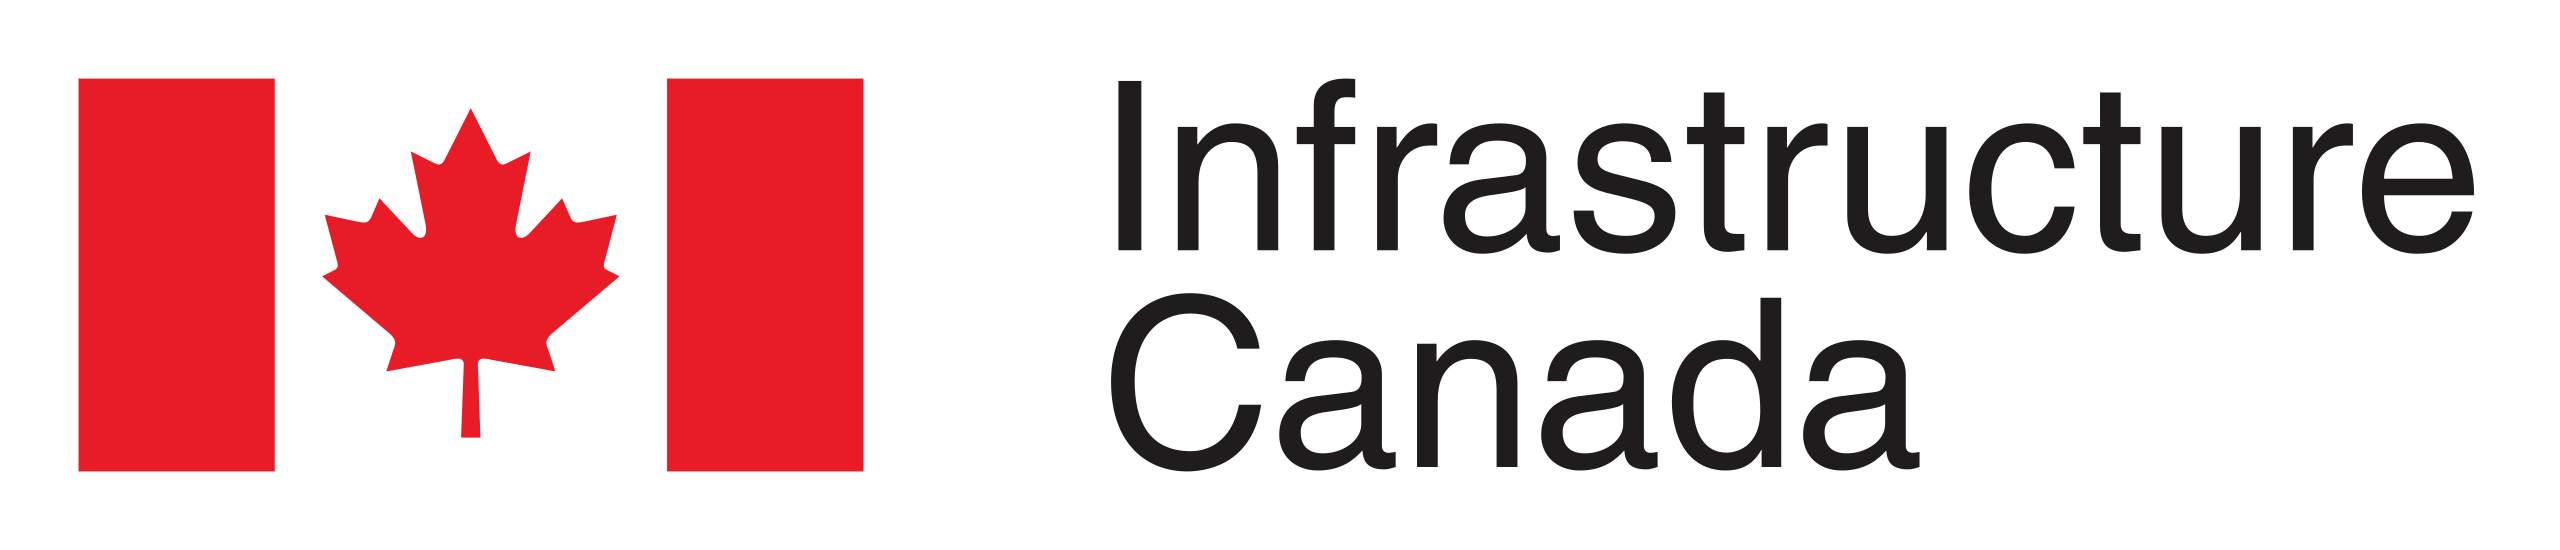 File:Infrastructure Canada logo.svg - Wikimedia Commons